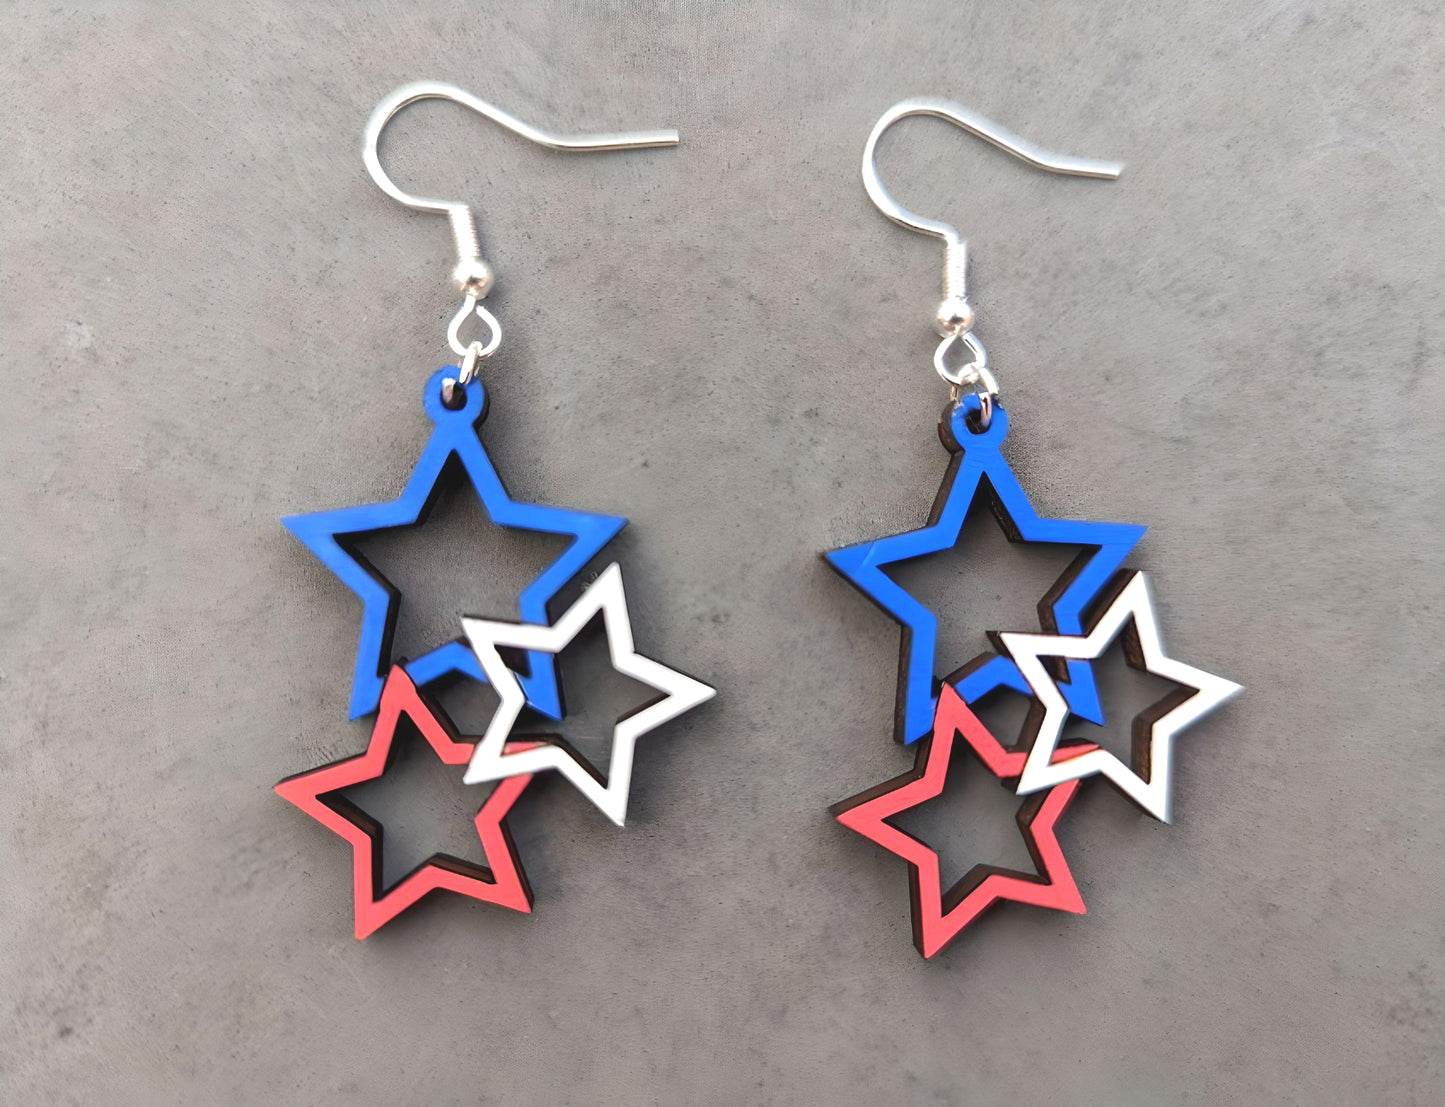 Star earring SVG digital file - Patriotic, New Year's, Party Earrings, Cut & score SVG laser cut file tested on Glowforge